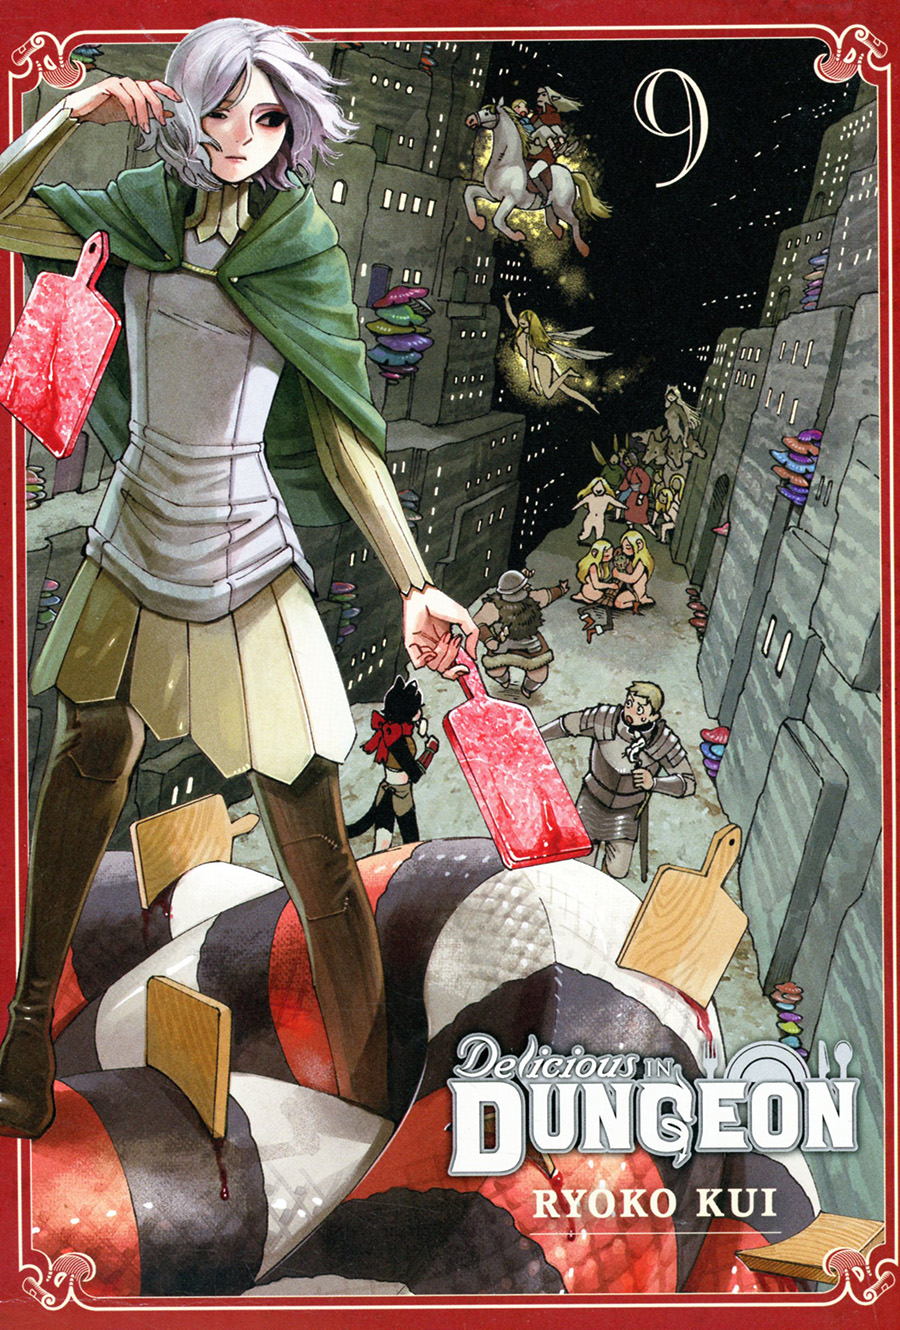 Delicious In Dungeon Vol 9 GN